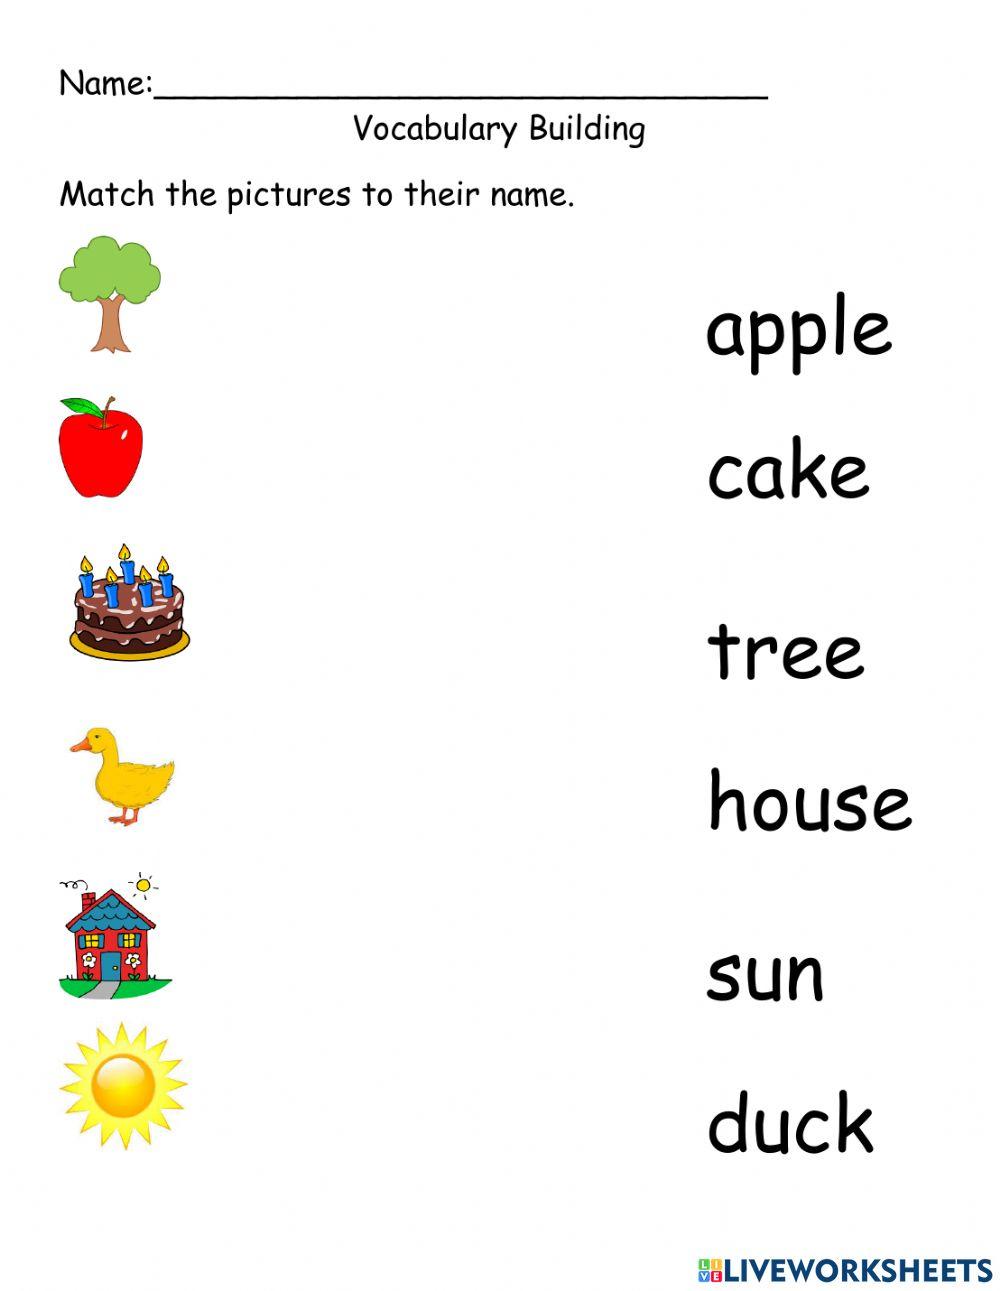 Matching pictures to their name worksheet | Live Worksheets